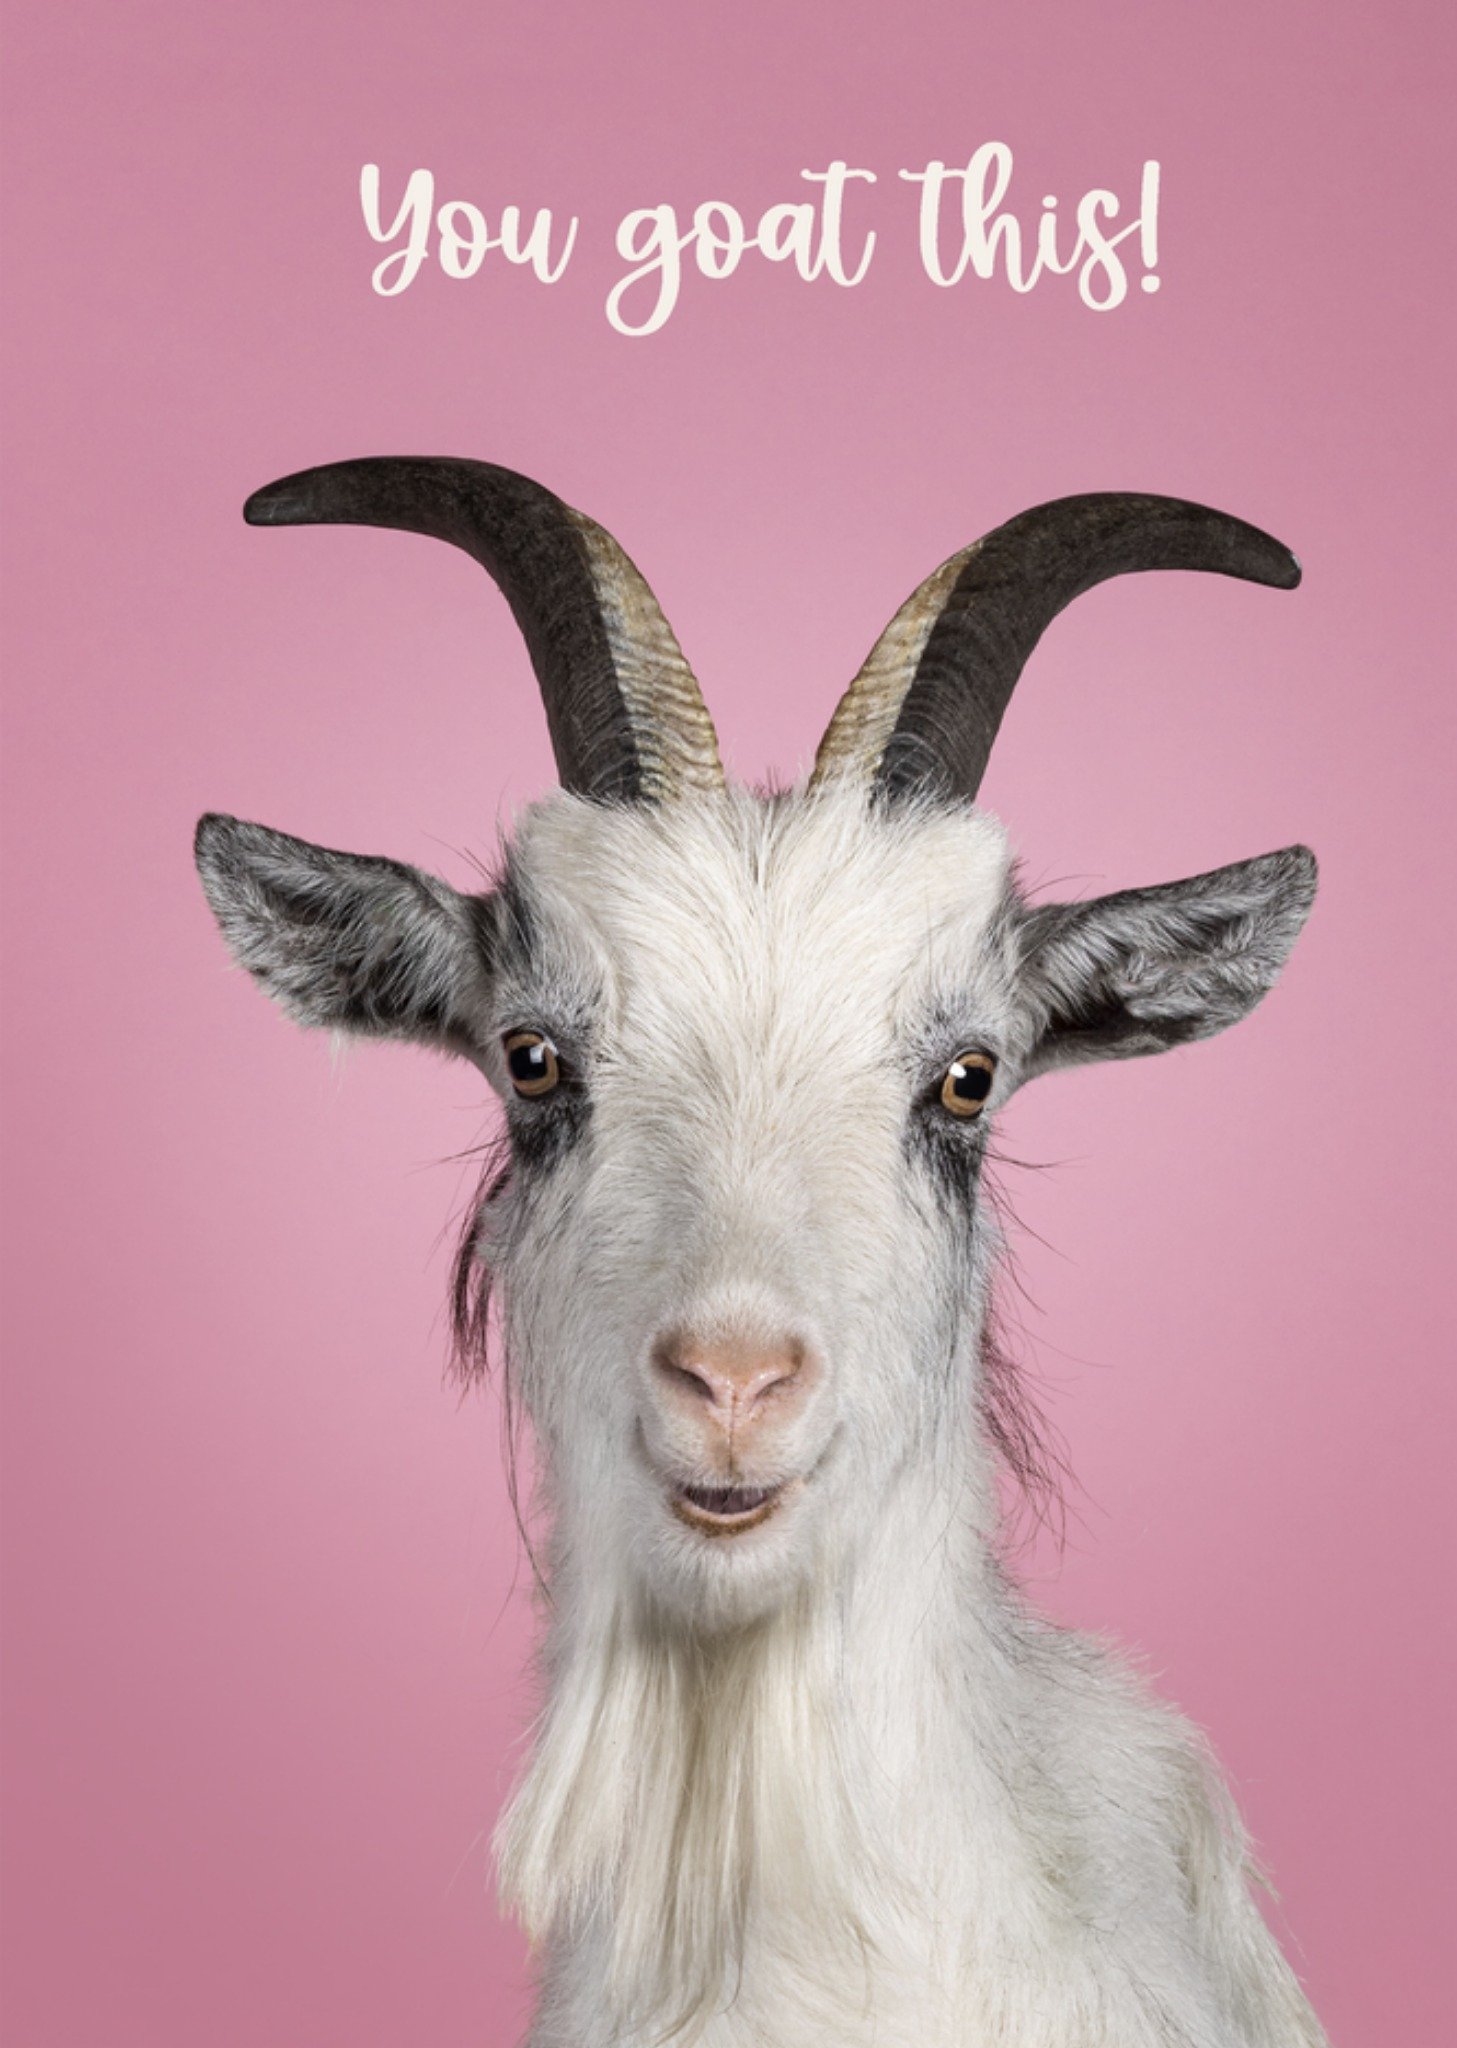 Catchy Images - Succeskaart - You goat this! - Grappig